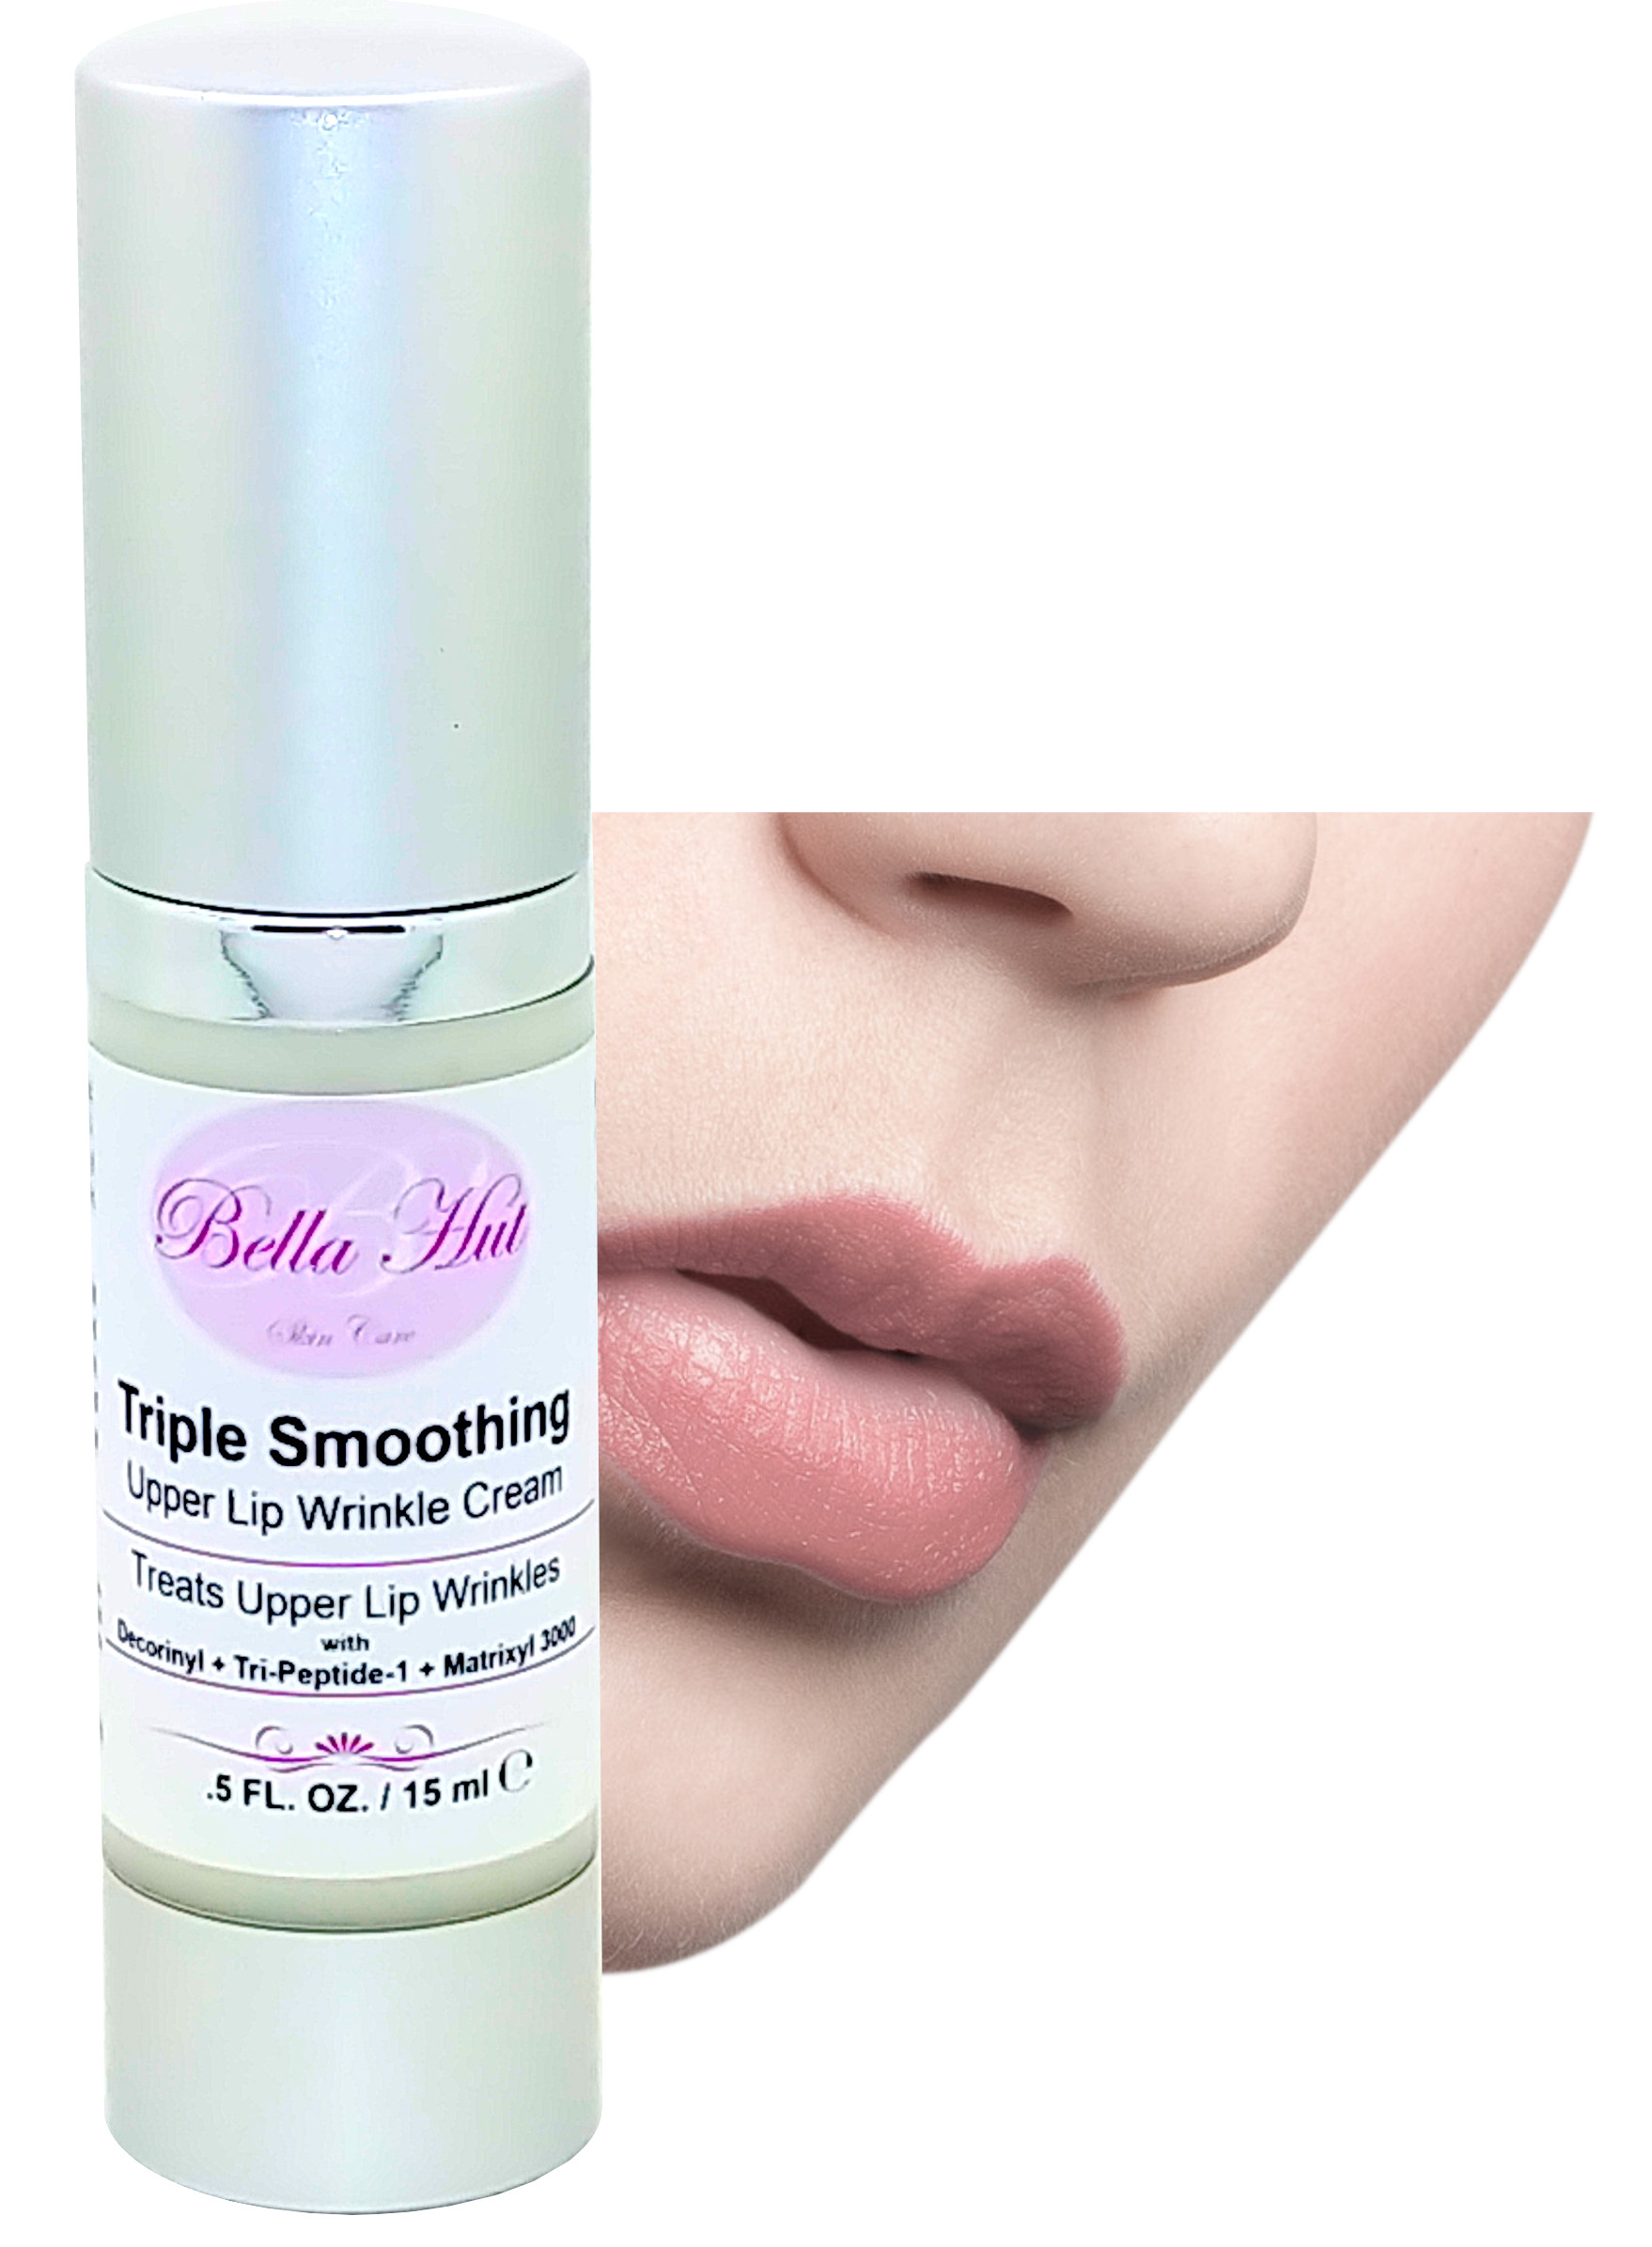 Upper lip wrinkle cream with Decorinyl, Tri-Peptide-1, Matrixyl 3000 And Hyaluronic Acid